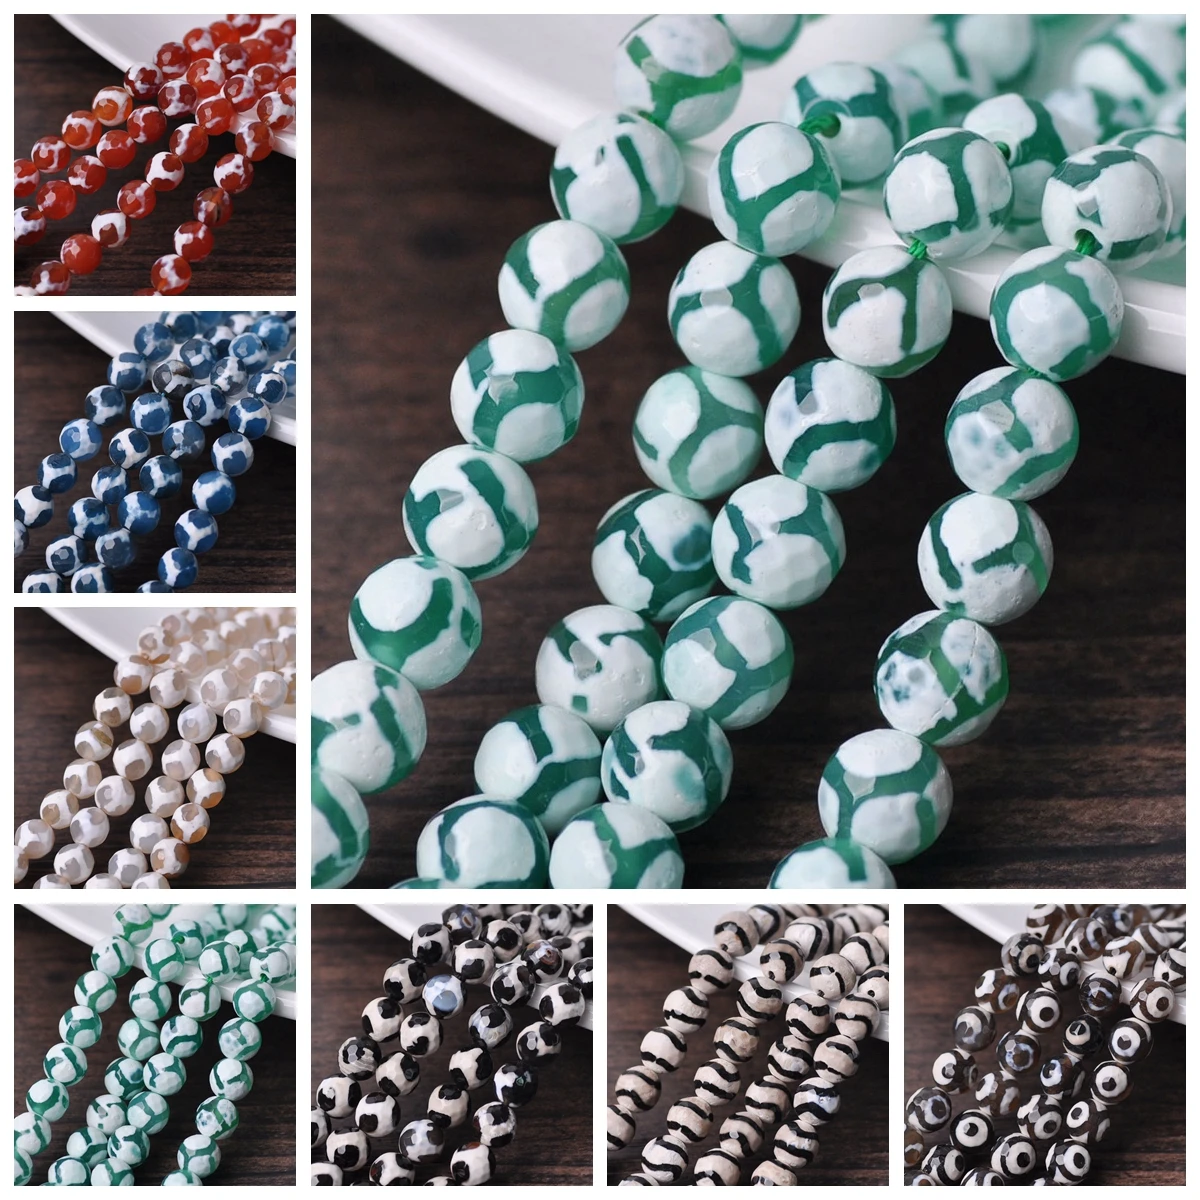 45pcs 8mm Round Faceted Combined Agate Stone Loose Beads Lot For DIY Jewelry Making Crafts Findings natural rock quartz 6 faceted single point crystal stone wand irregular gemstone for chakra balancing meditation home decor